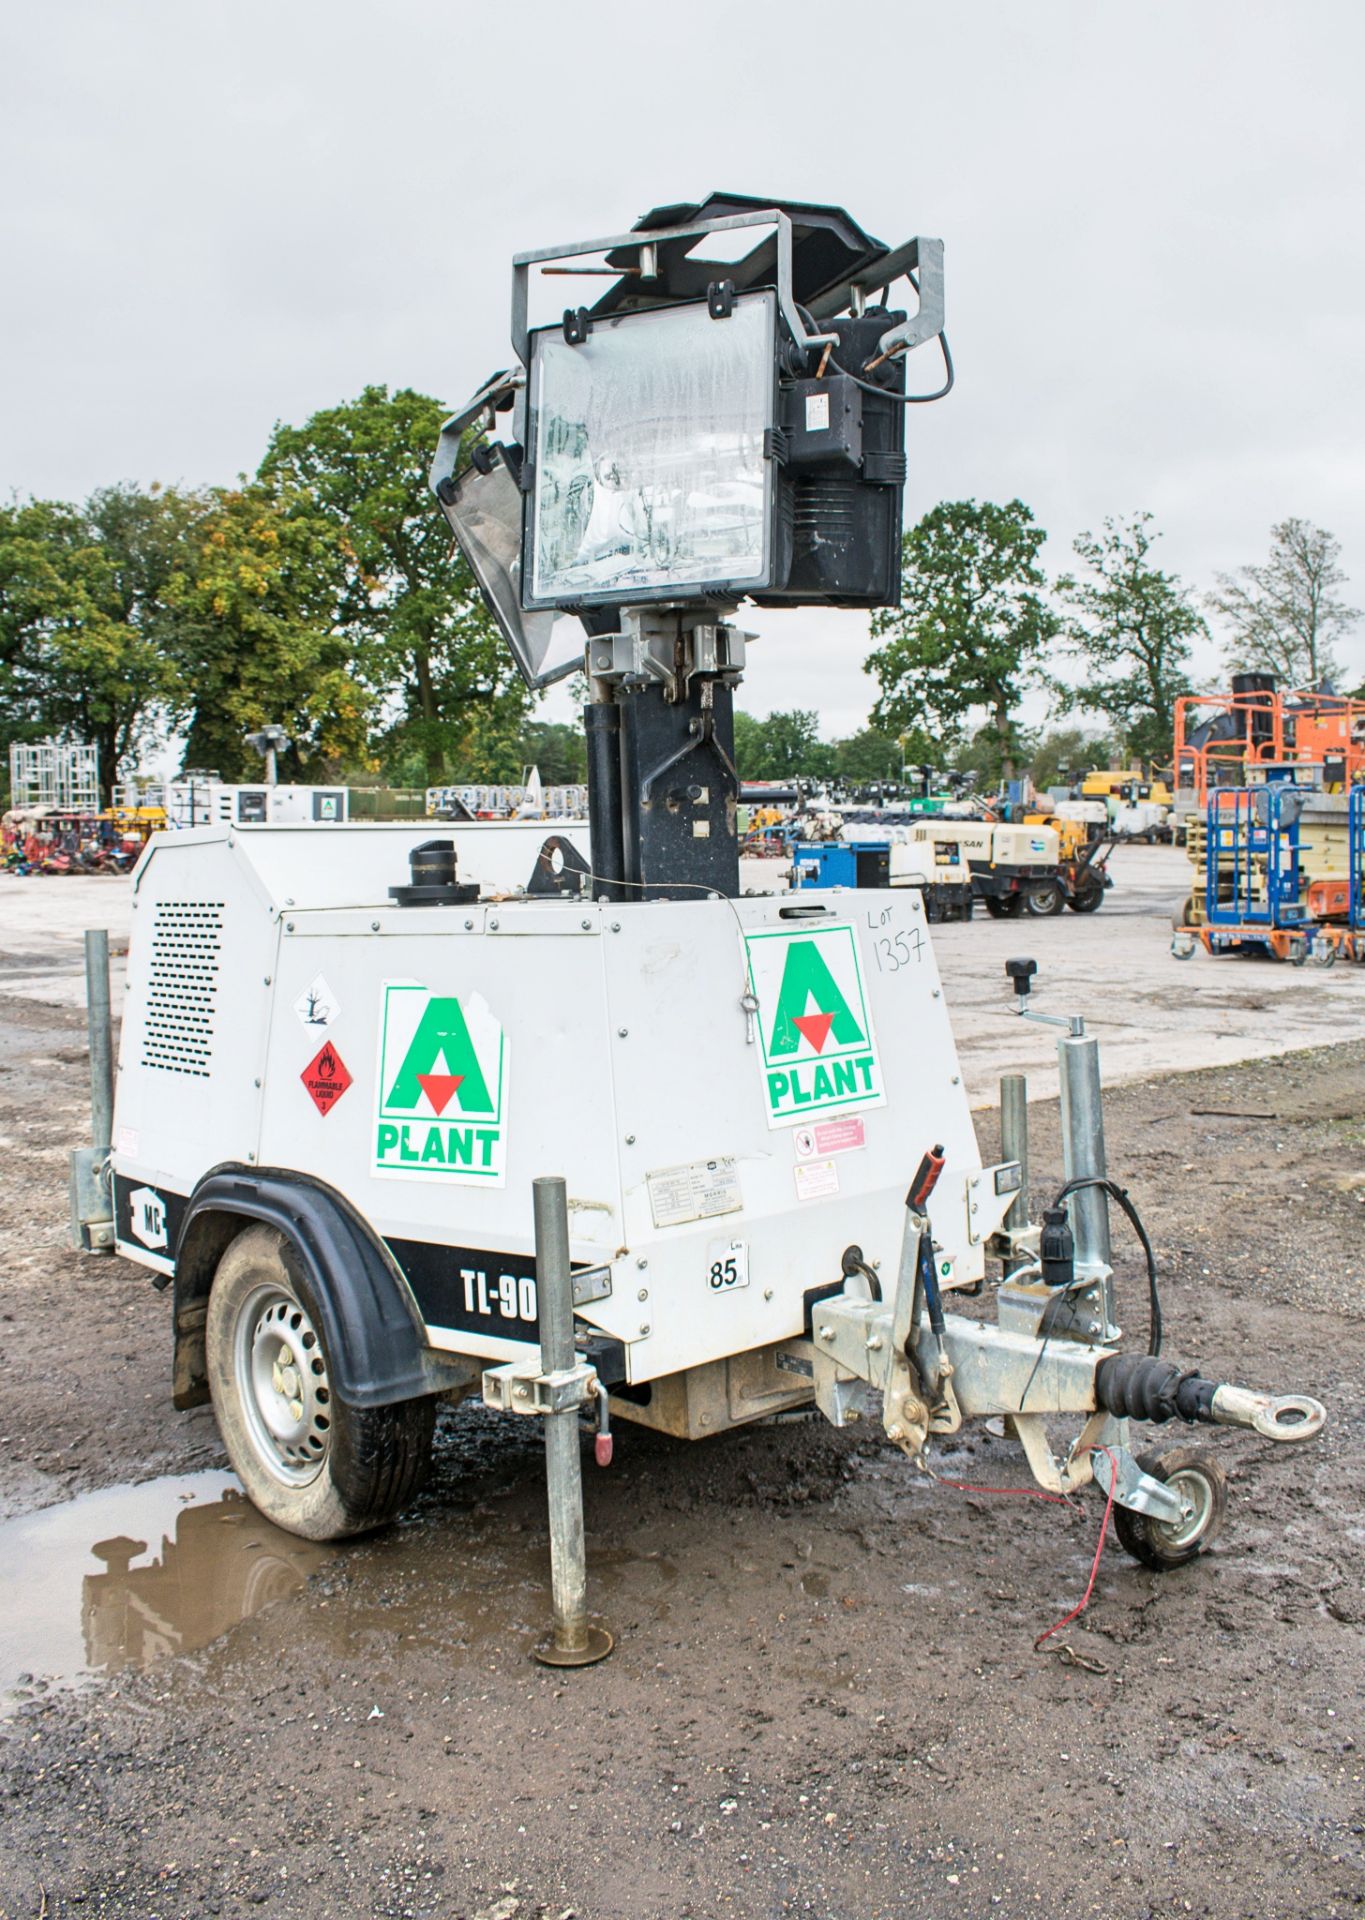 SMC TL-90 diesel driven mobile lighting tower Year: 2014 S/N: 1411151 Recorded Hours: 2394 A653724